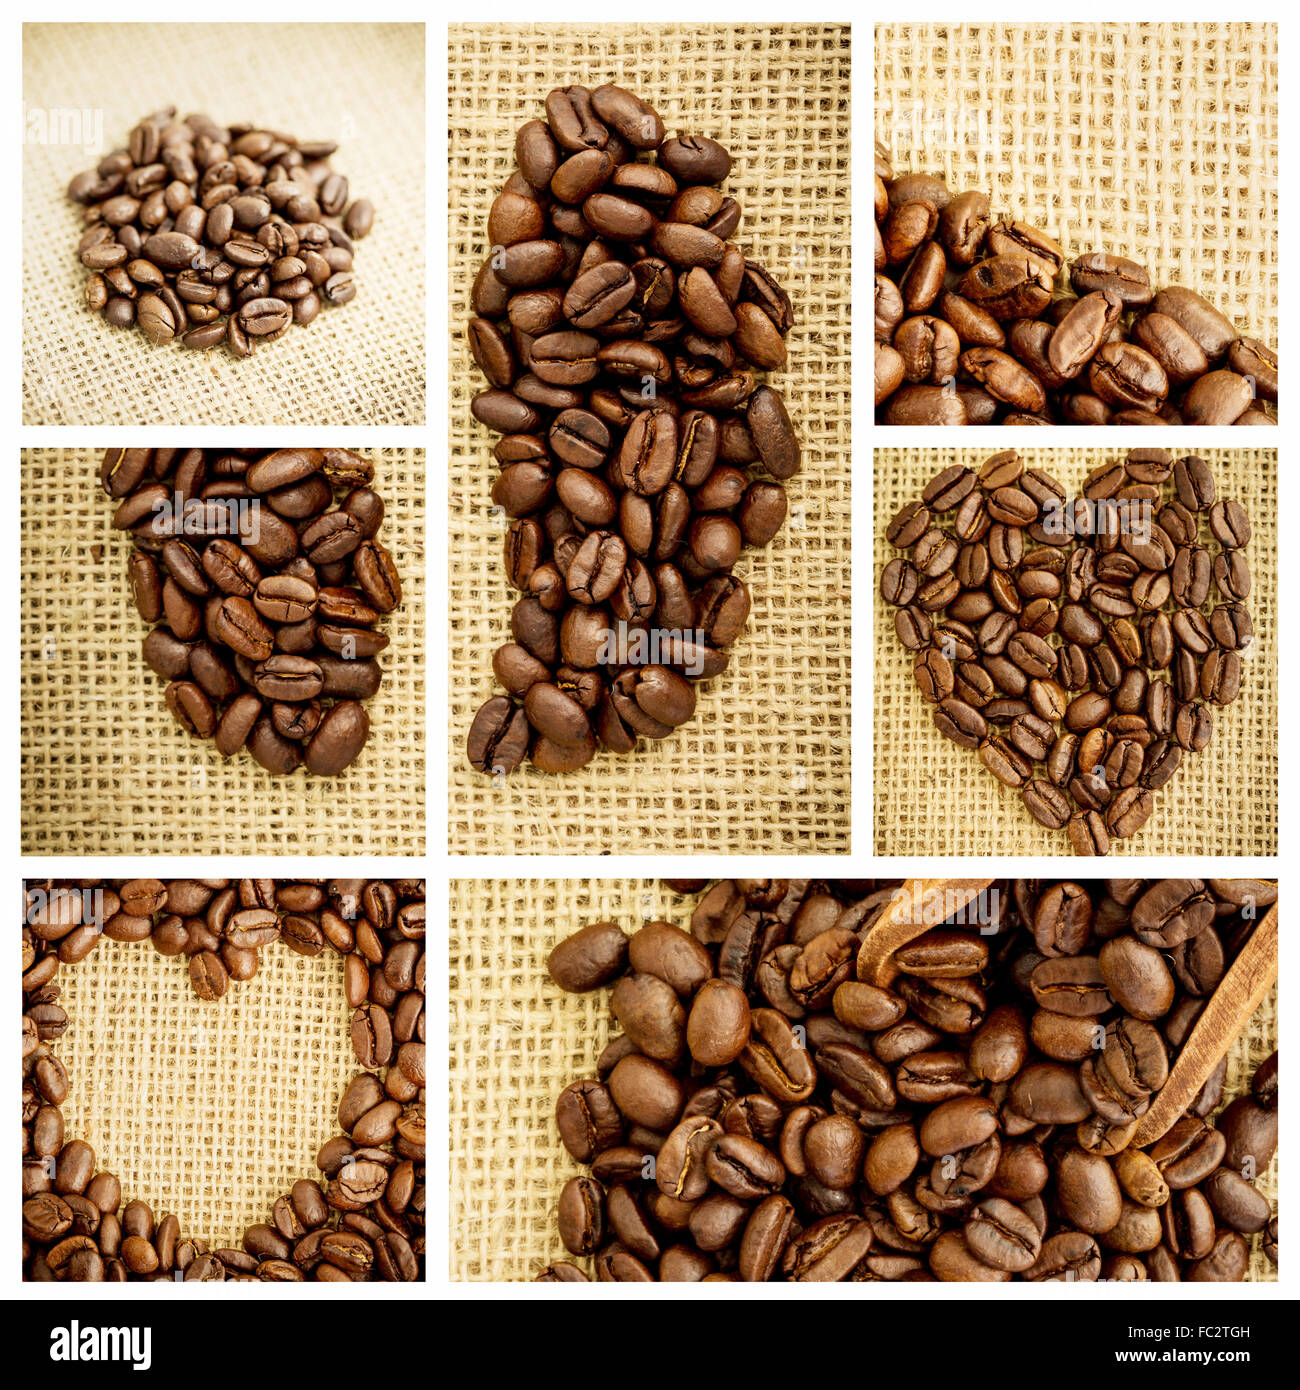 Composite image of various pictures with beans Stock Photo